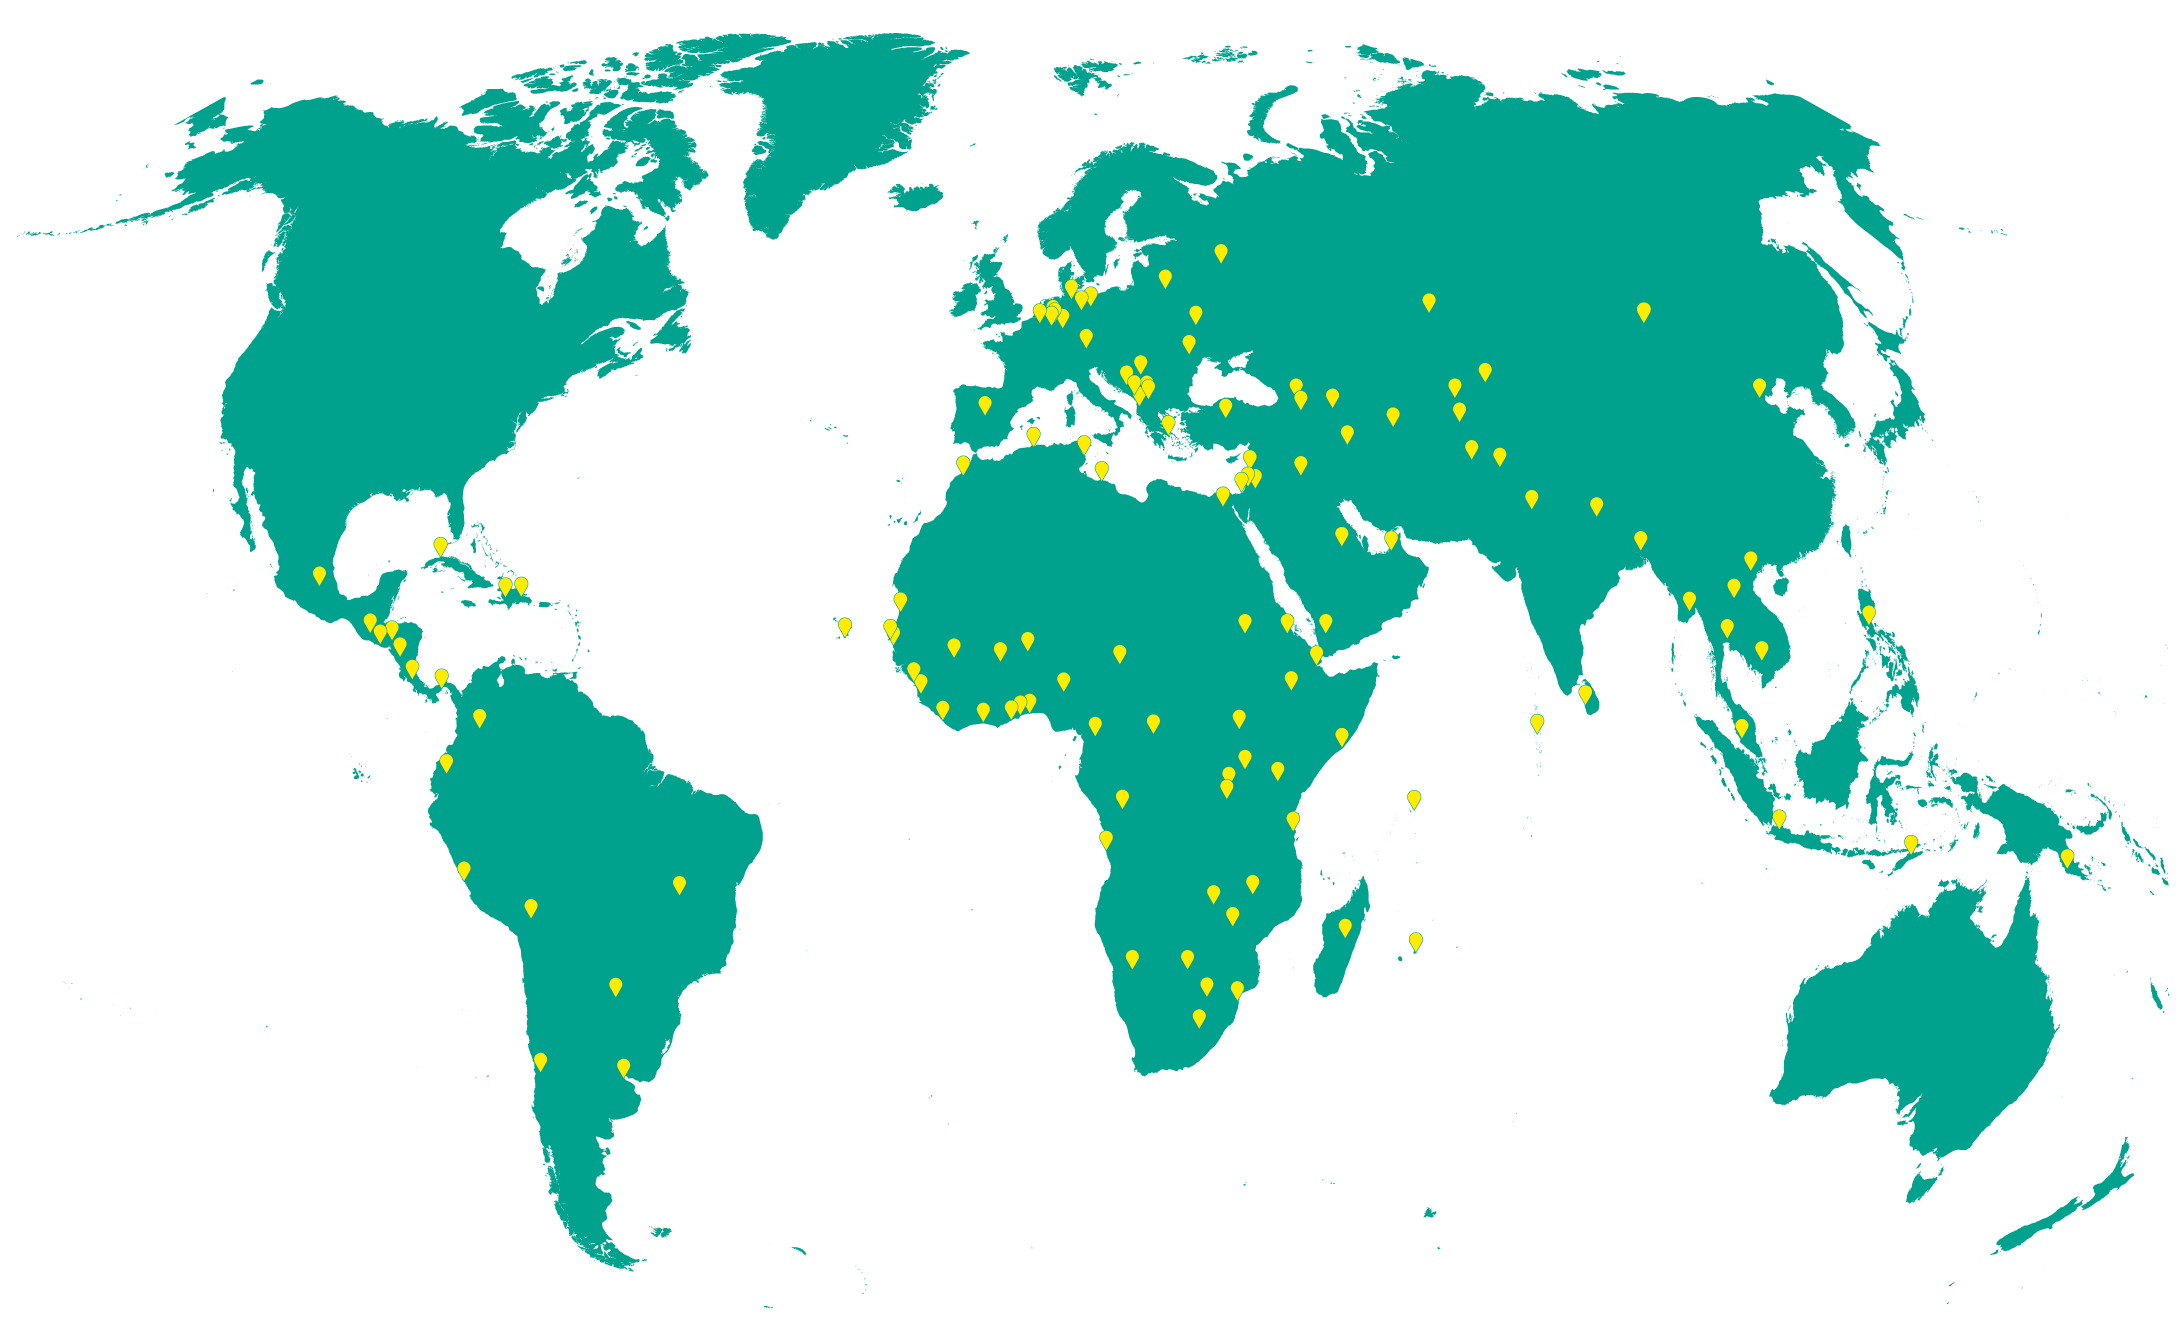 A green world map on a white background. Yellow pins mark GIZ locations around the world.